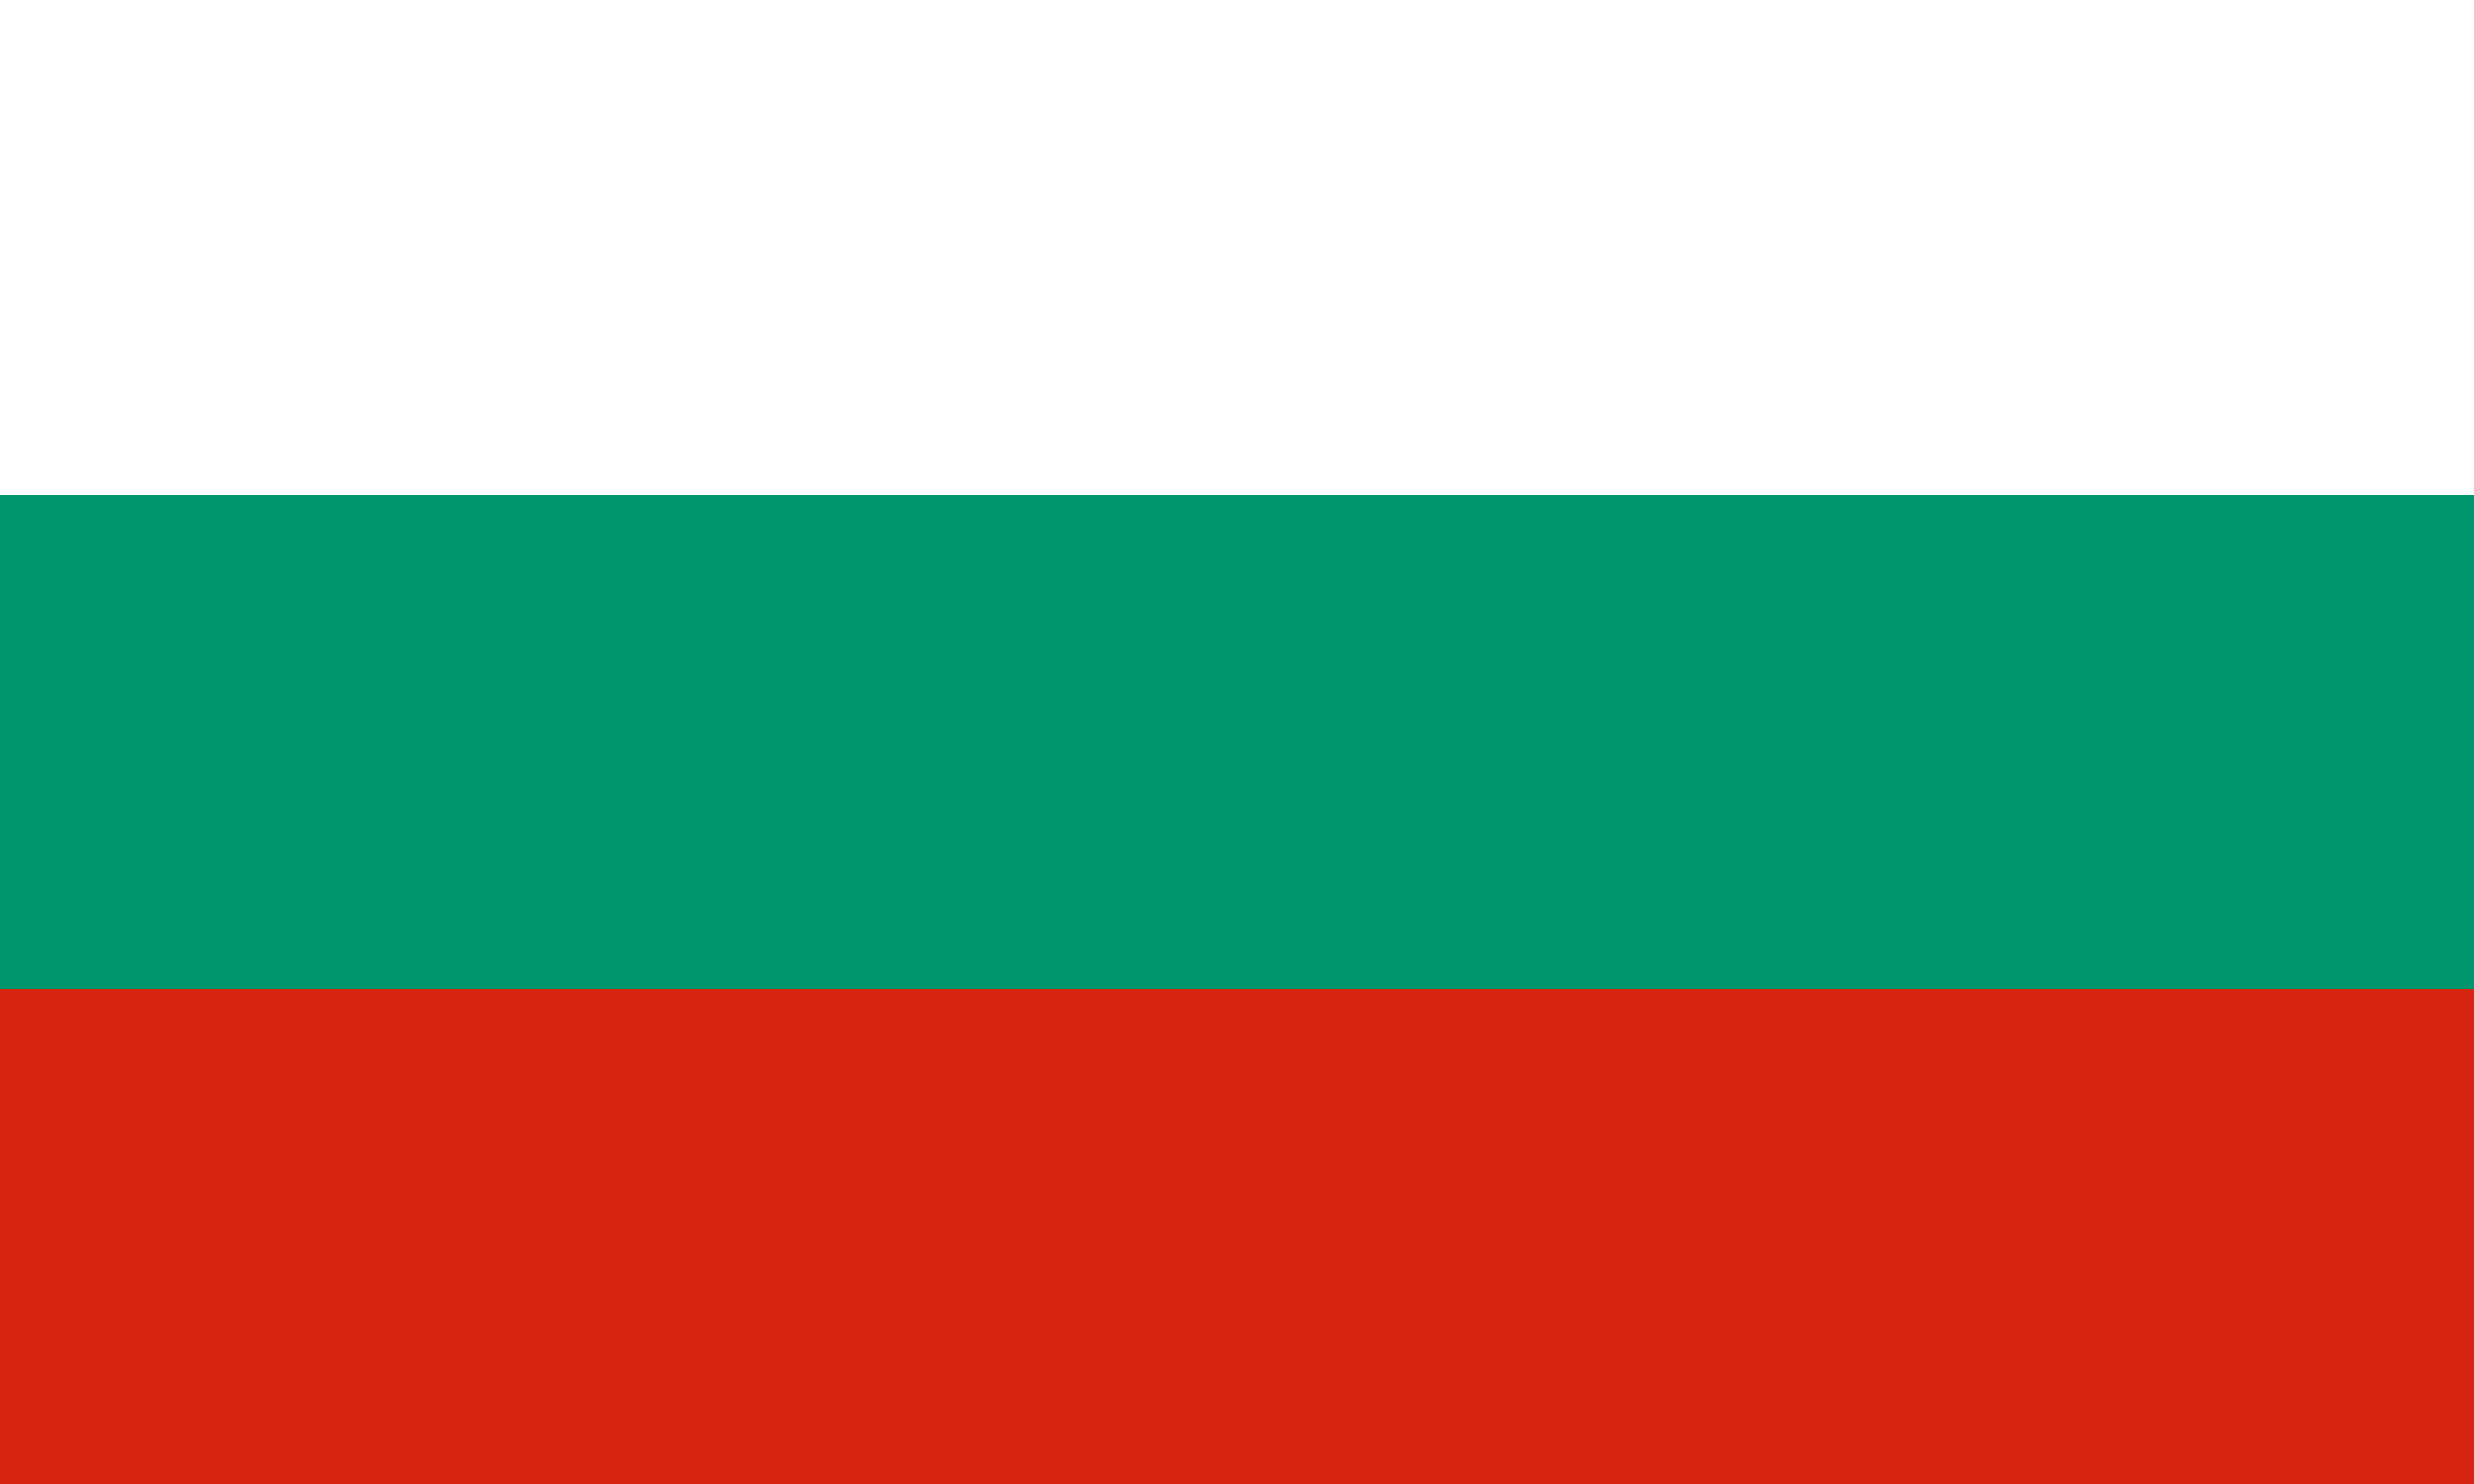 The flag of Bulgaria. Three horizontal bands, the top being white, middle green, and bottom red.